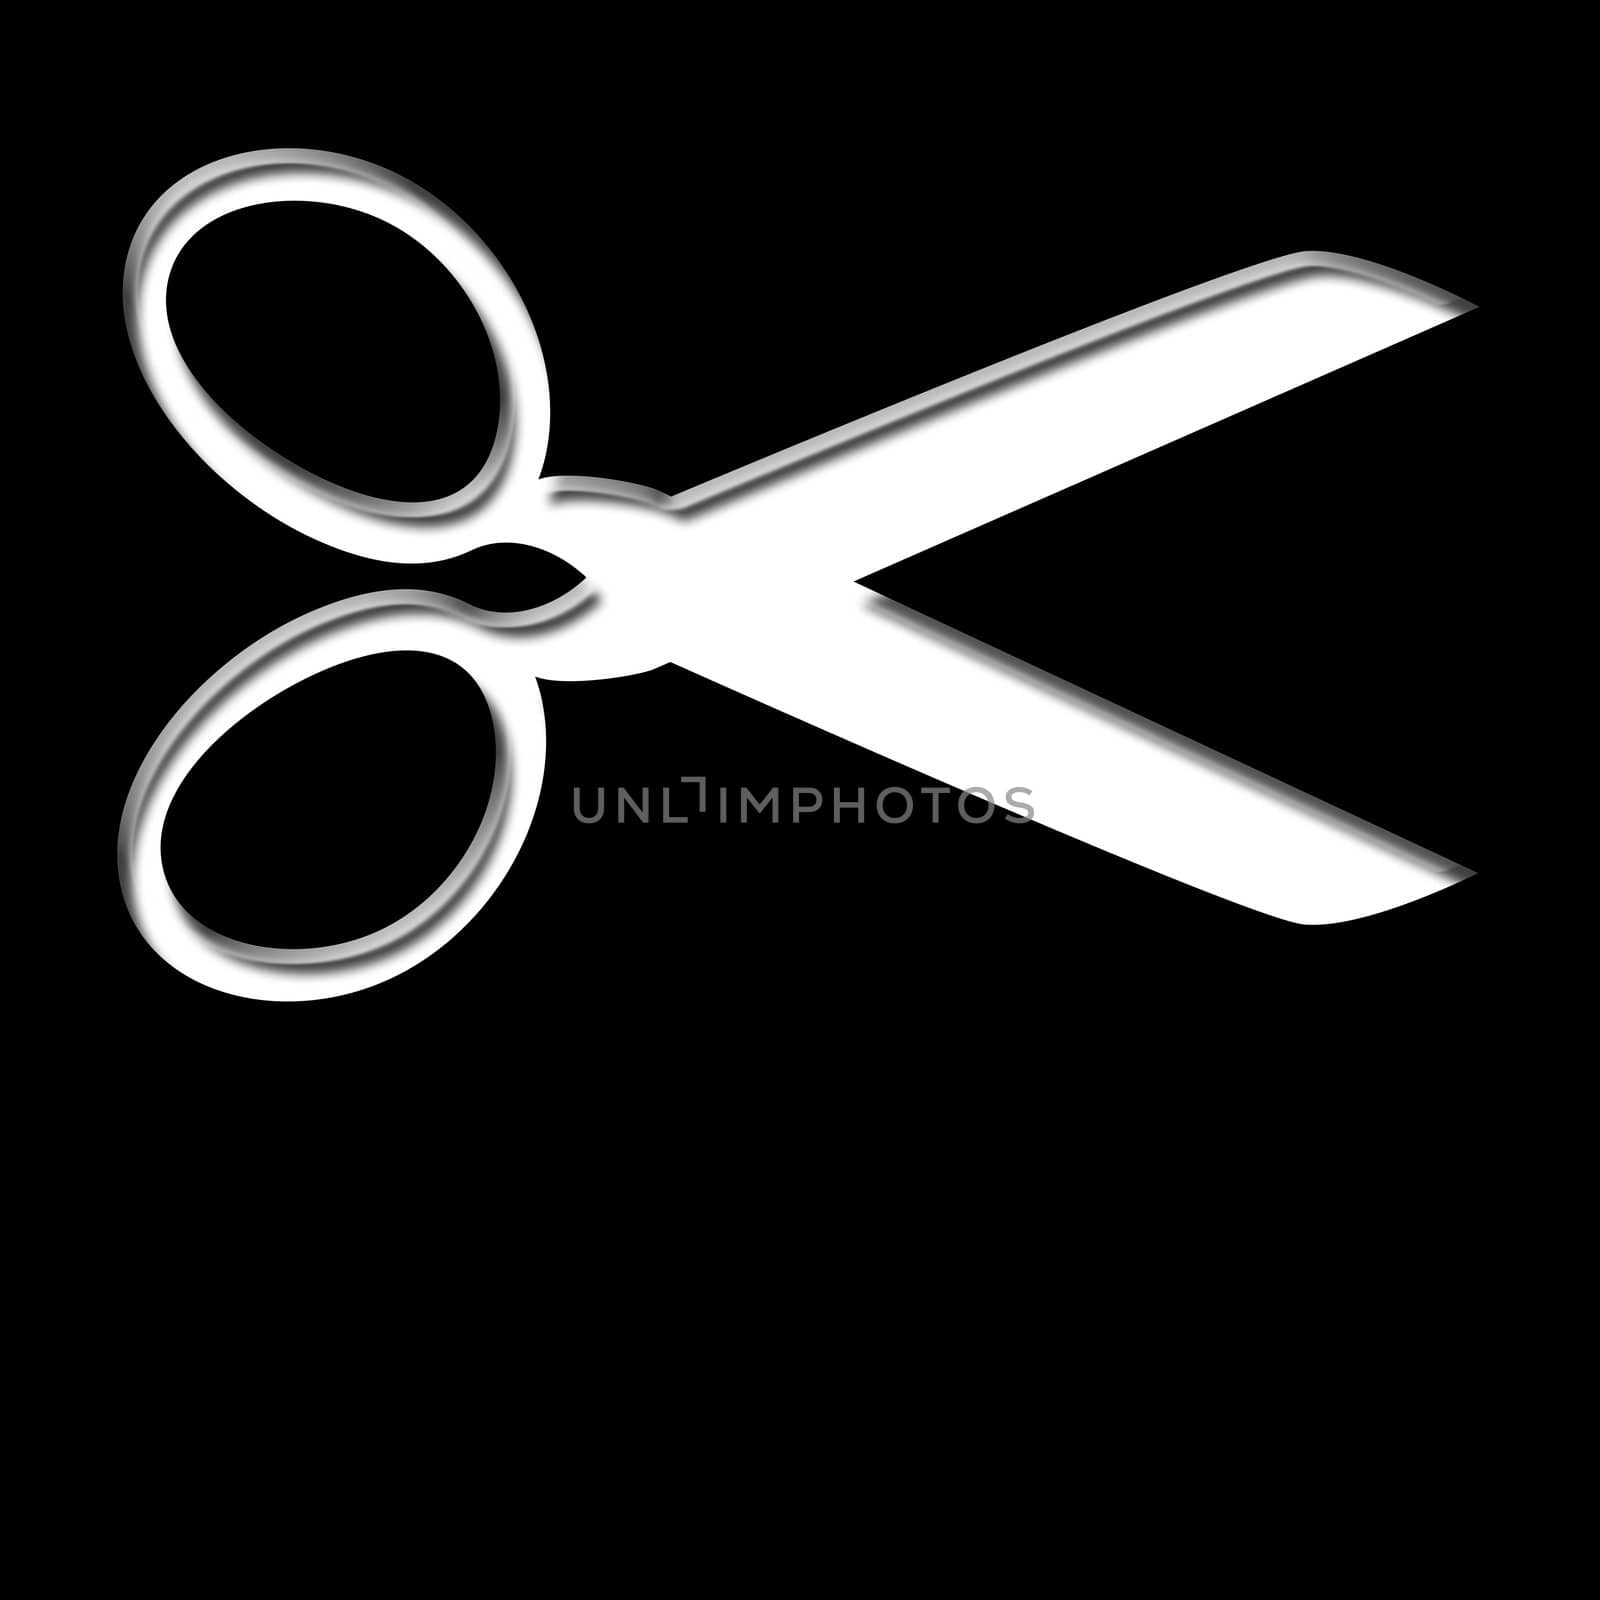 scissors on black background silhouette and copy space